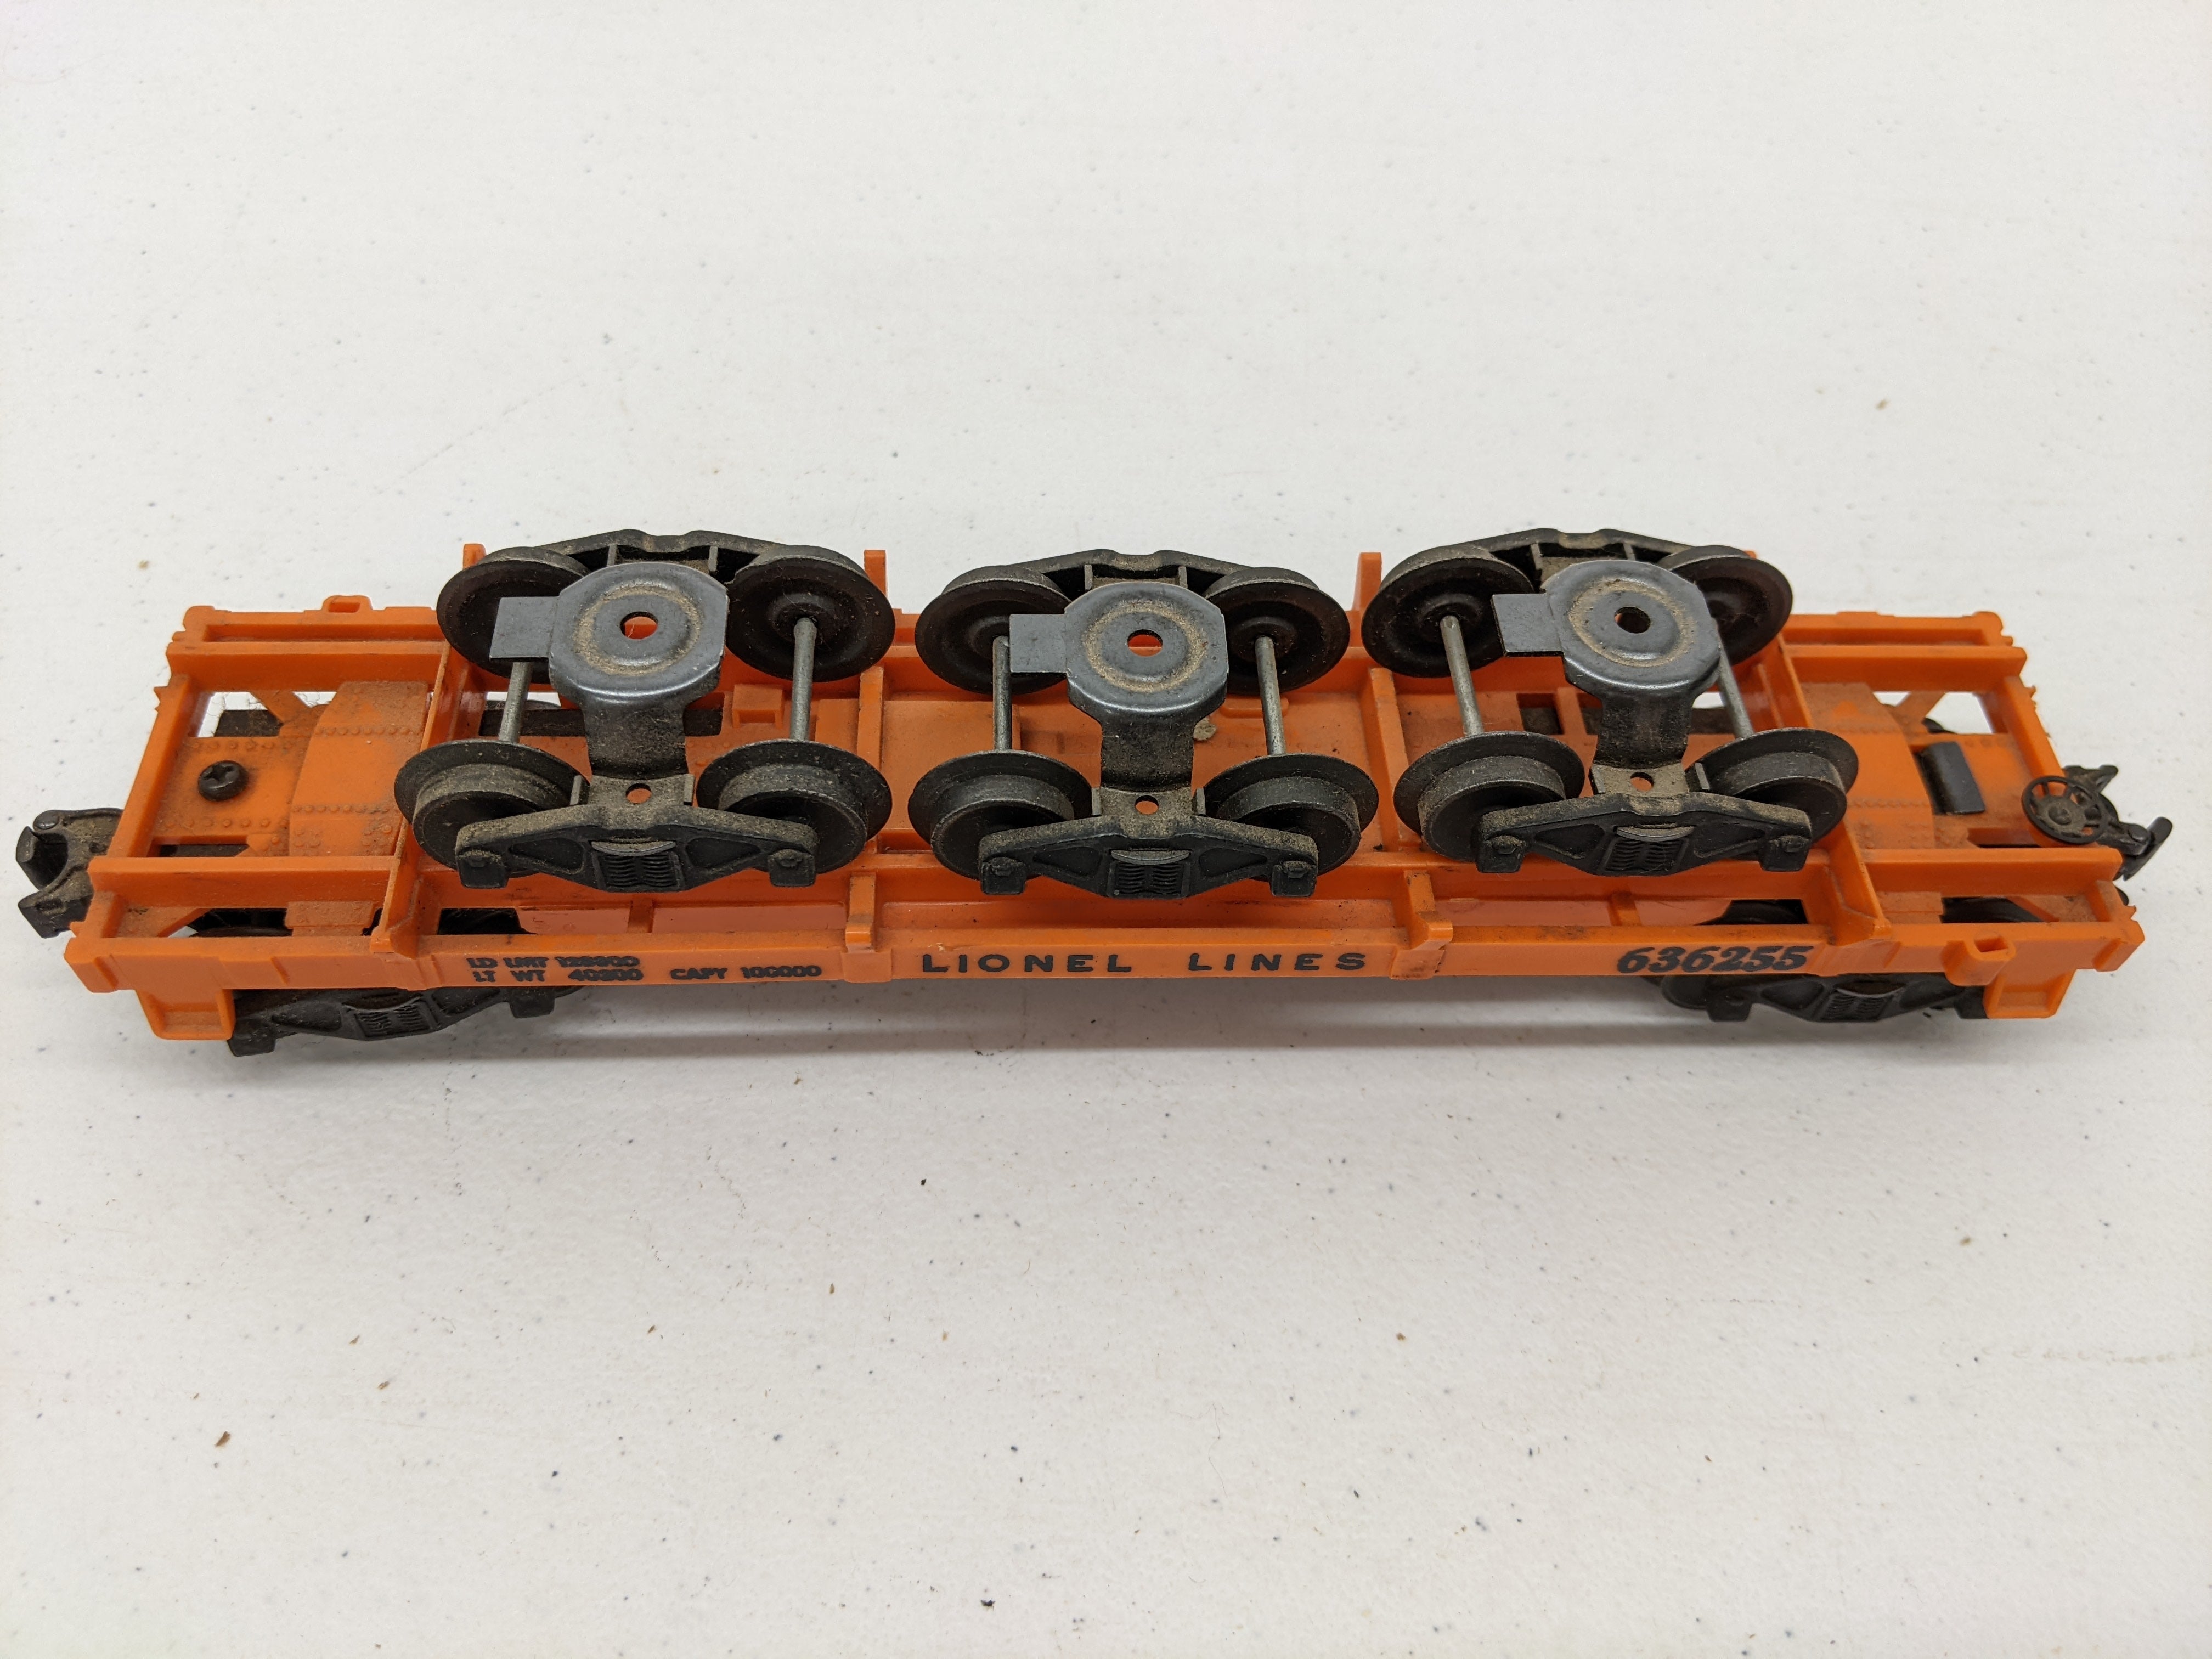 USED Lionel 6362 O Scale, Rail Truck Car, Lionel Lines #636255